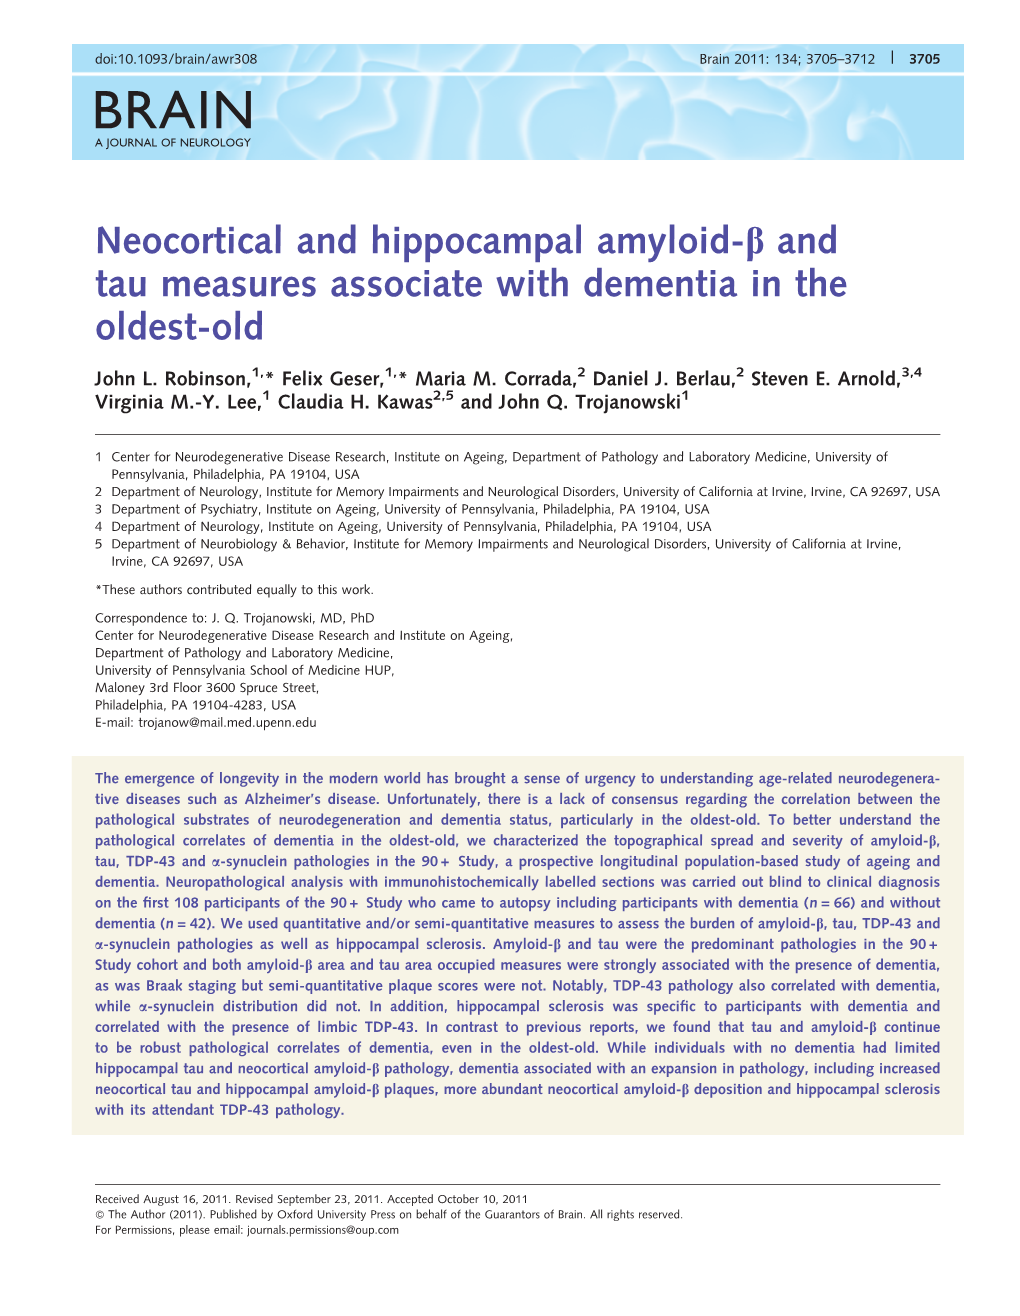 Neocortical and Hippocampal Amyloid-B and Tau Measures Associate with Dementia in the Oldest-Old